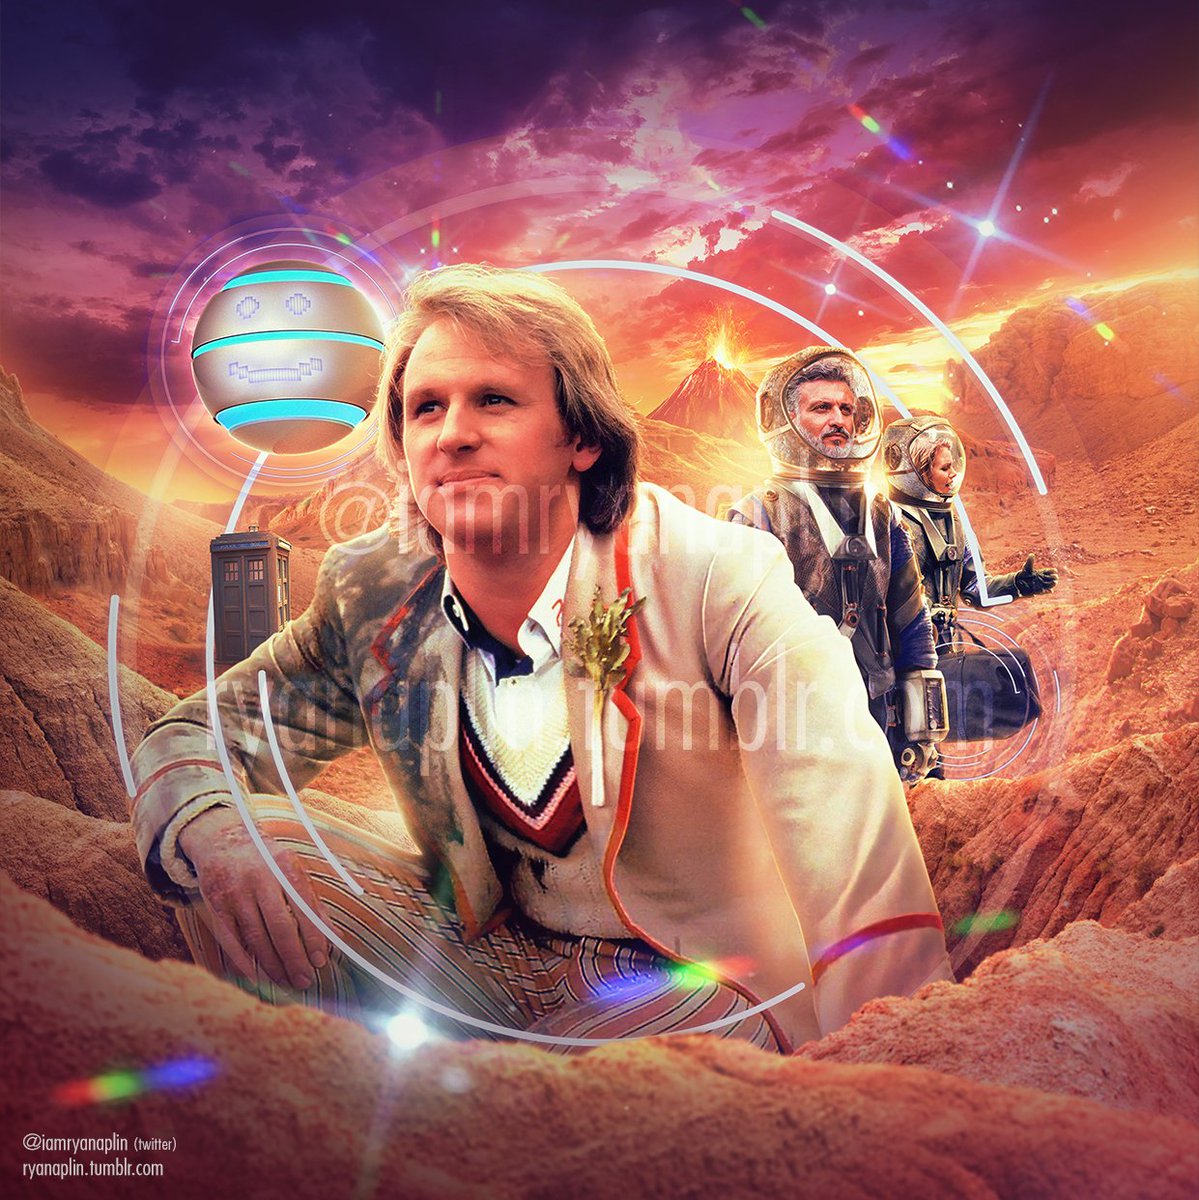 Really happy to have been asked to do the cover for this audio!! Here's the full textless version! @OnFleakProd #DoctorWho #DWFanCreations #AudioDrama #5thDoctor
twitter.com/OnFleakProd/st…